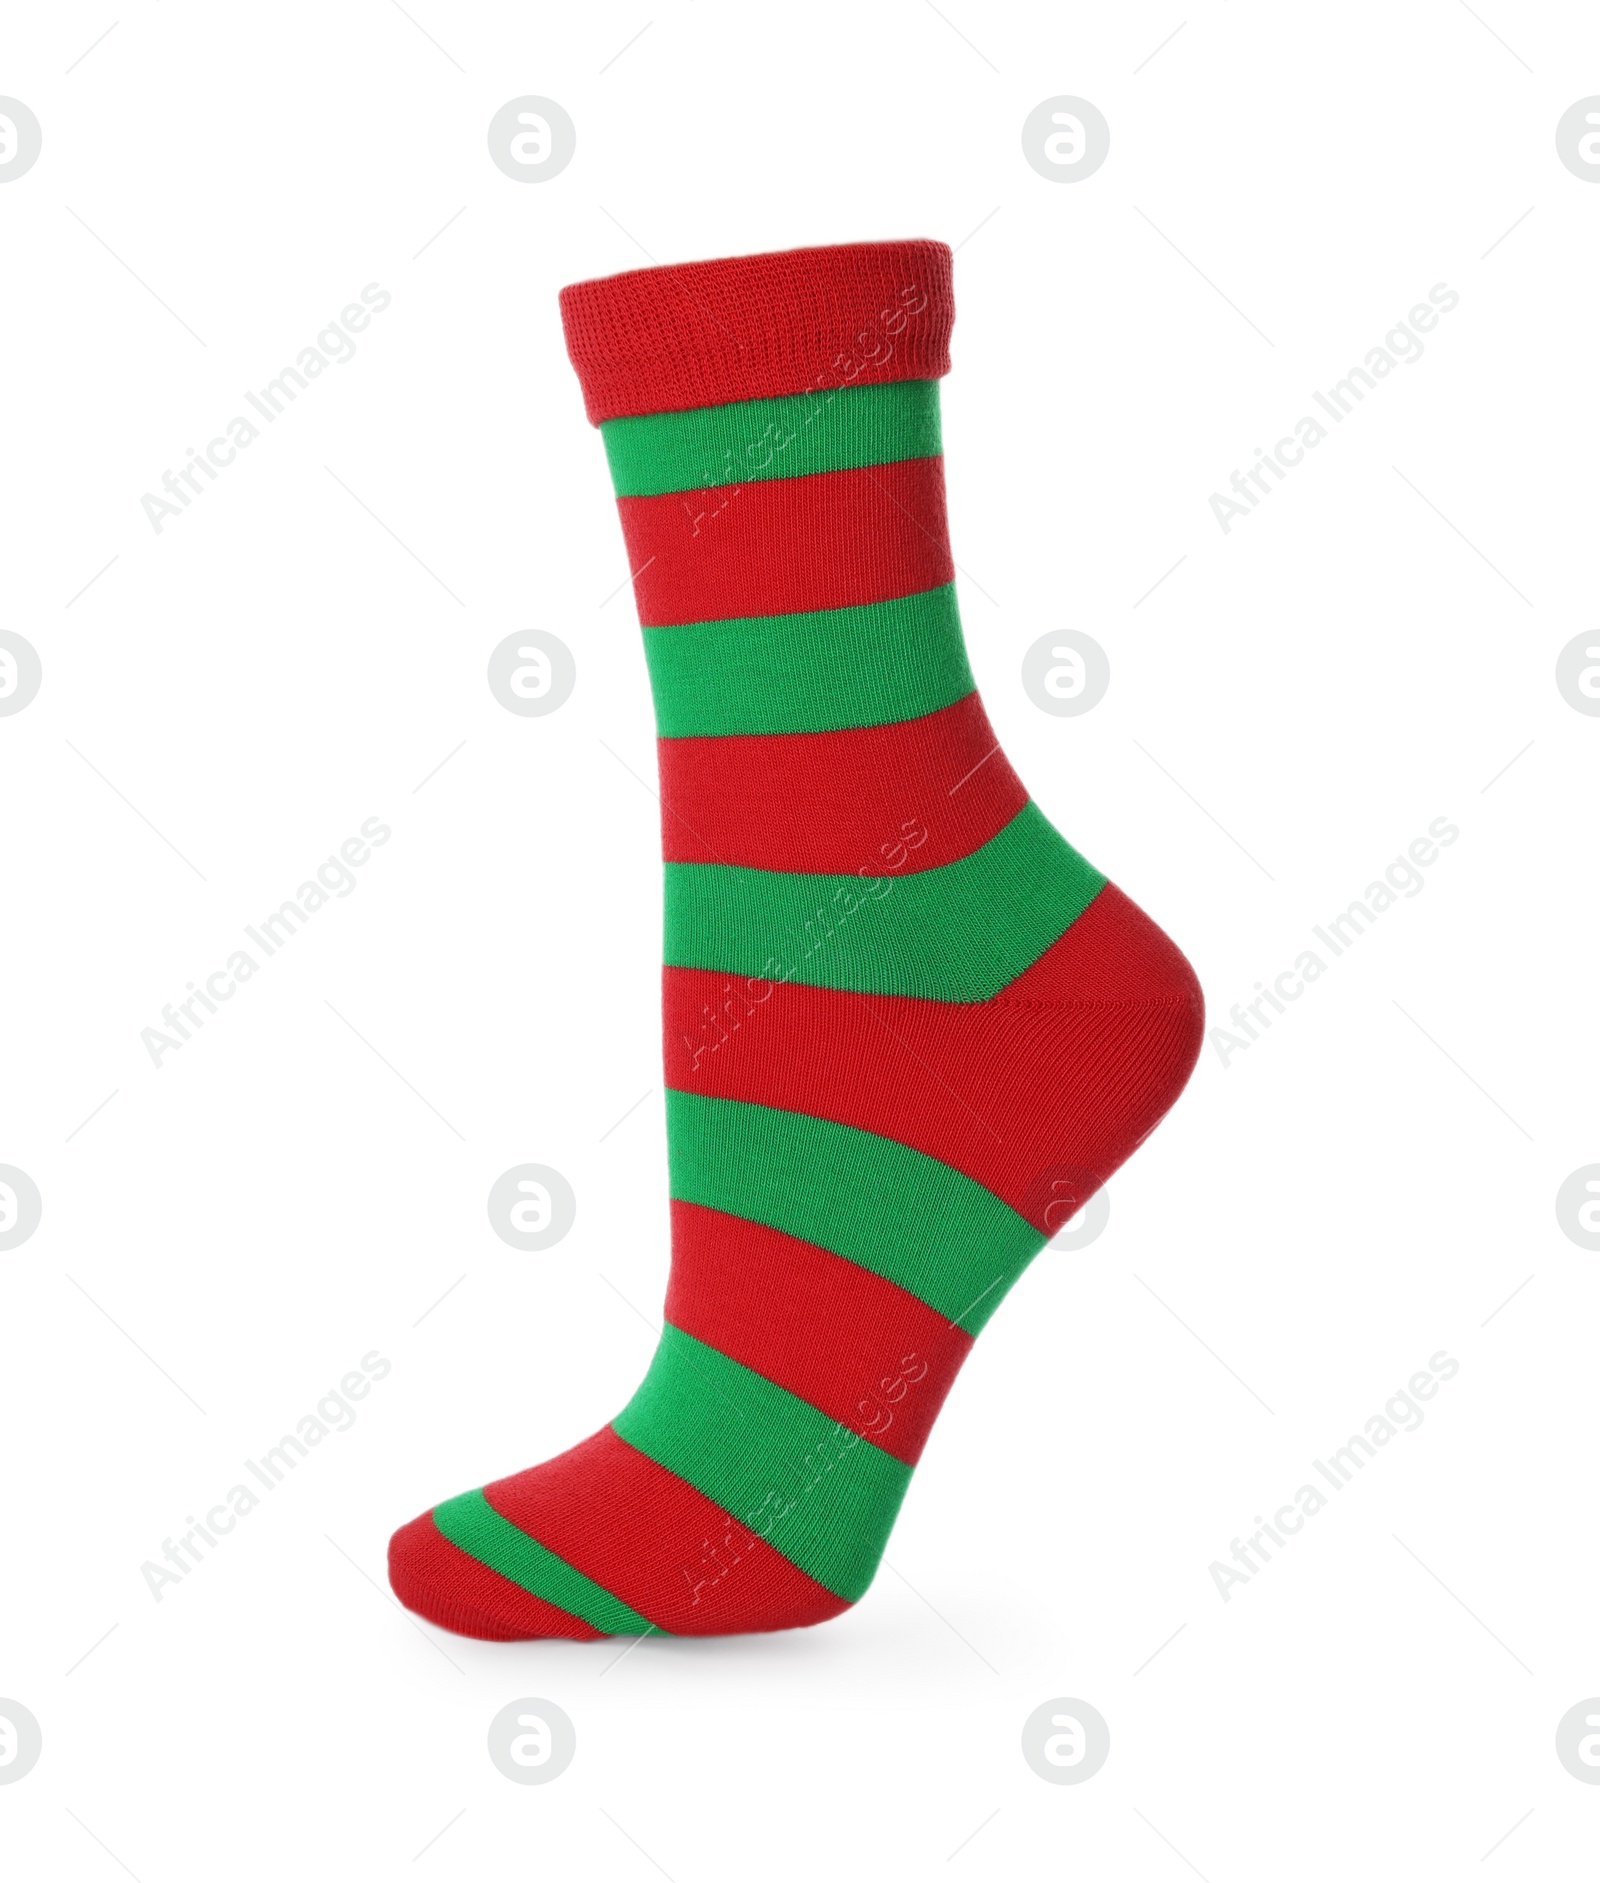 Photo of One red and green striped sock isolated on white